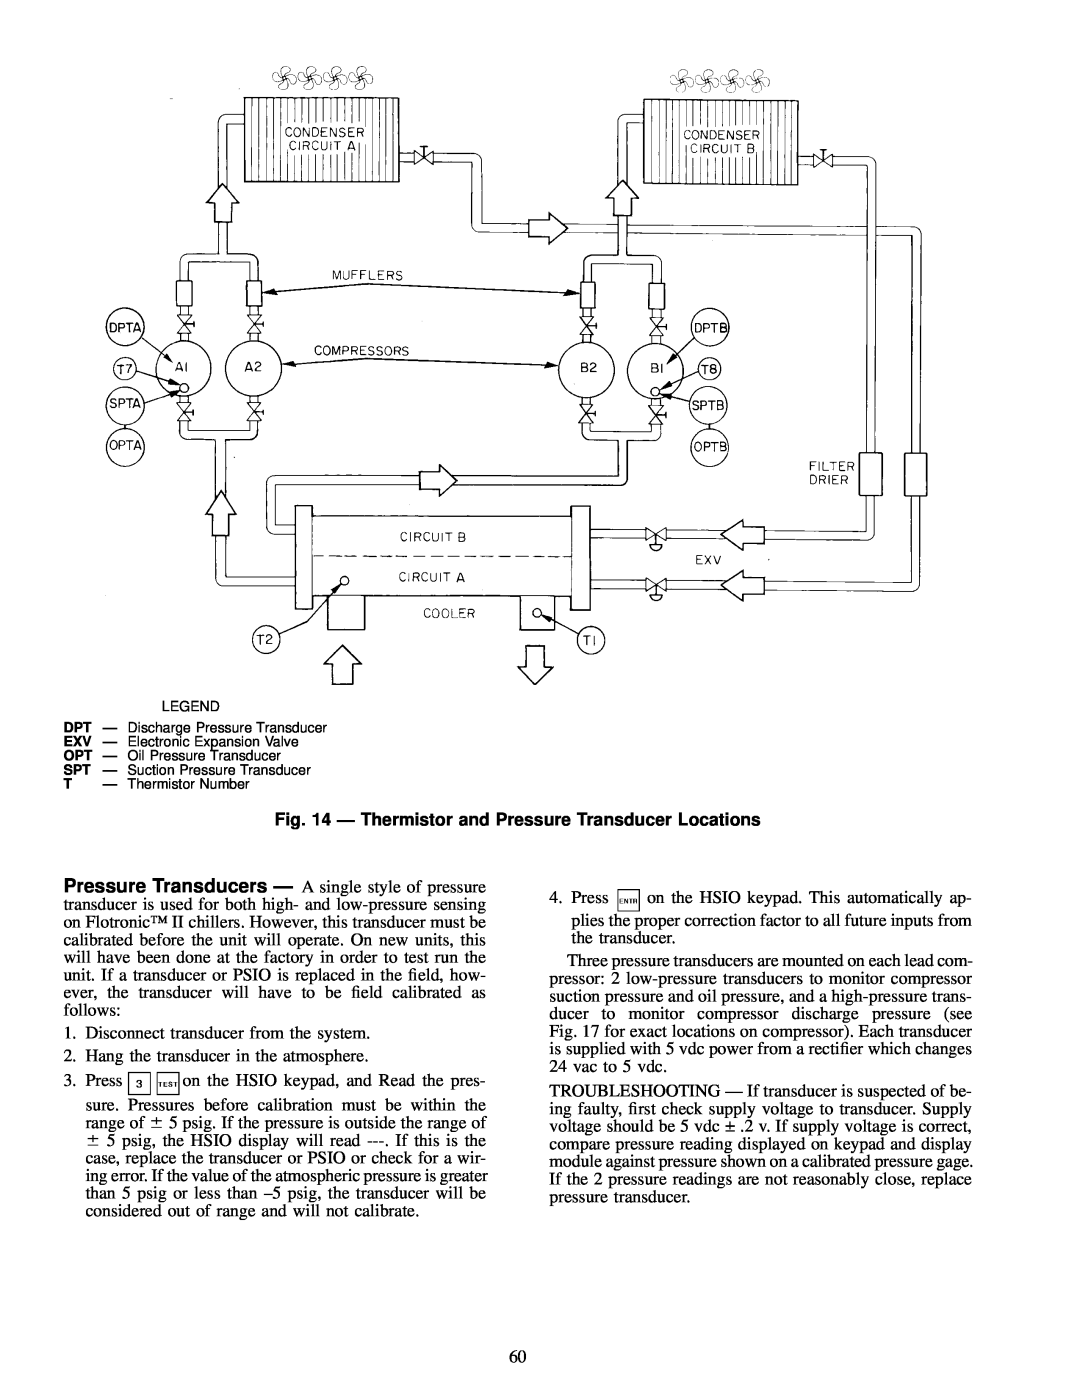 Carrier 30GN040-420 operating instructions Disconnect transducer from the system 